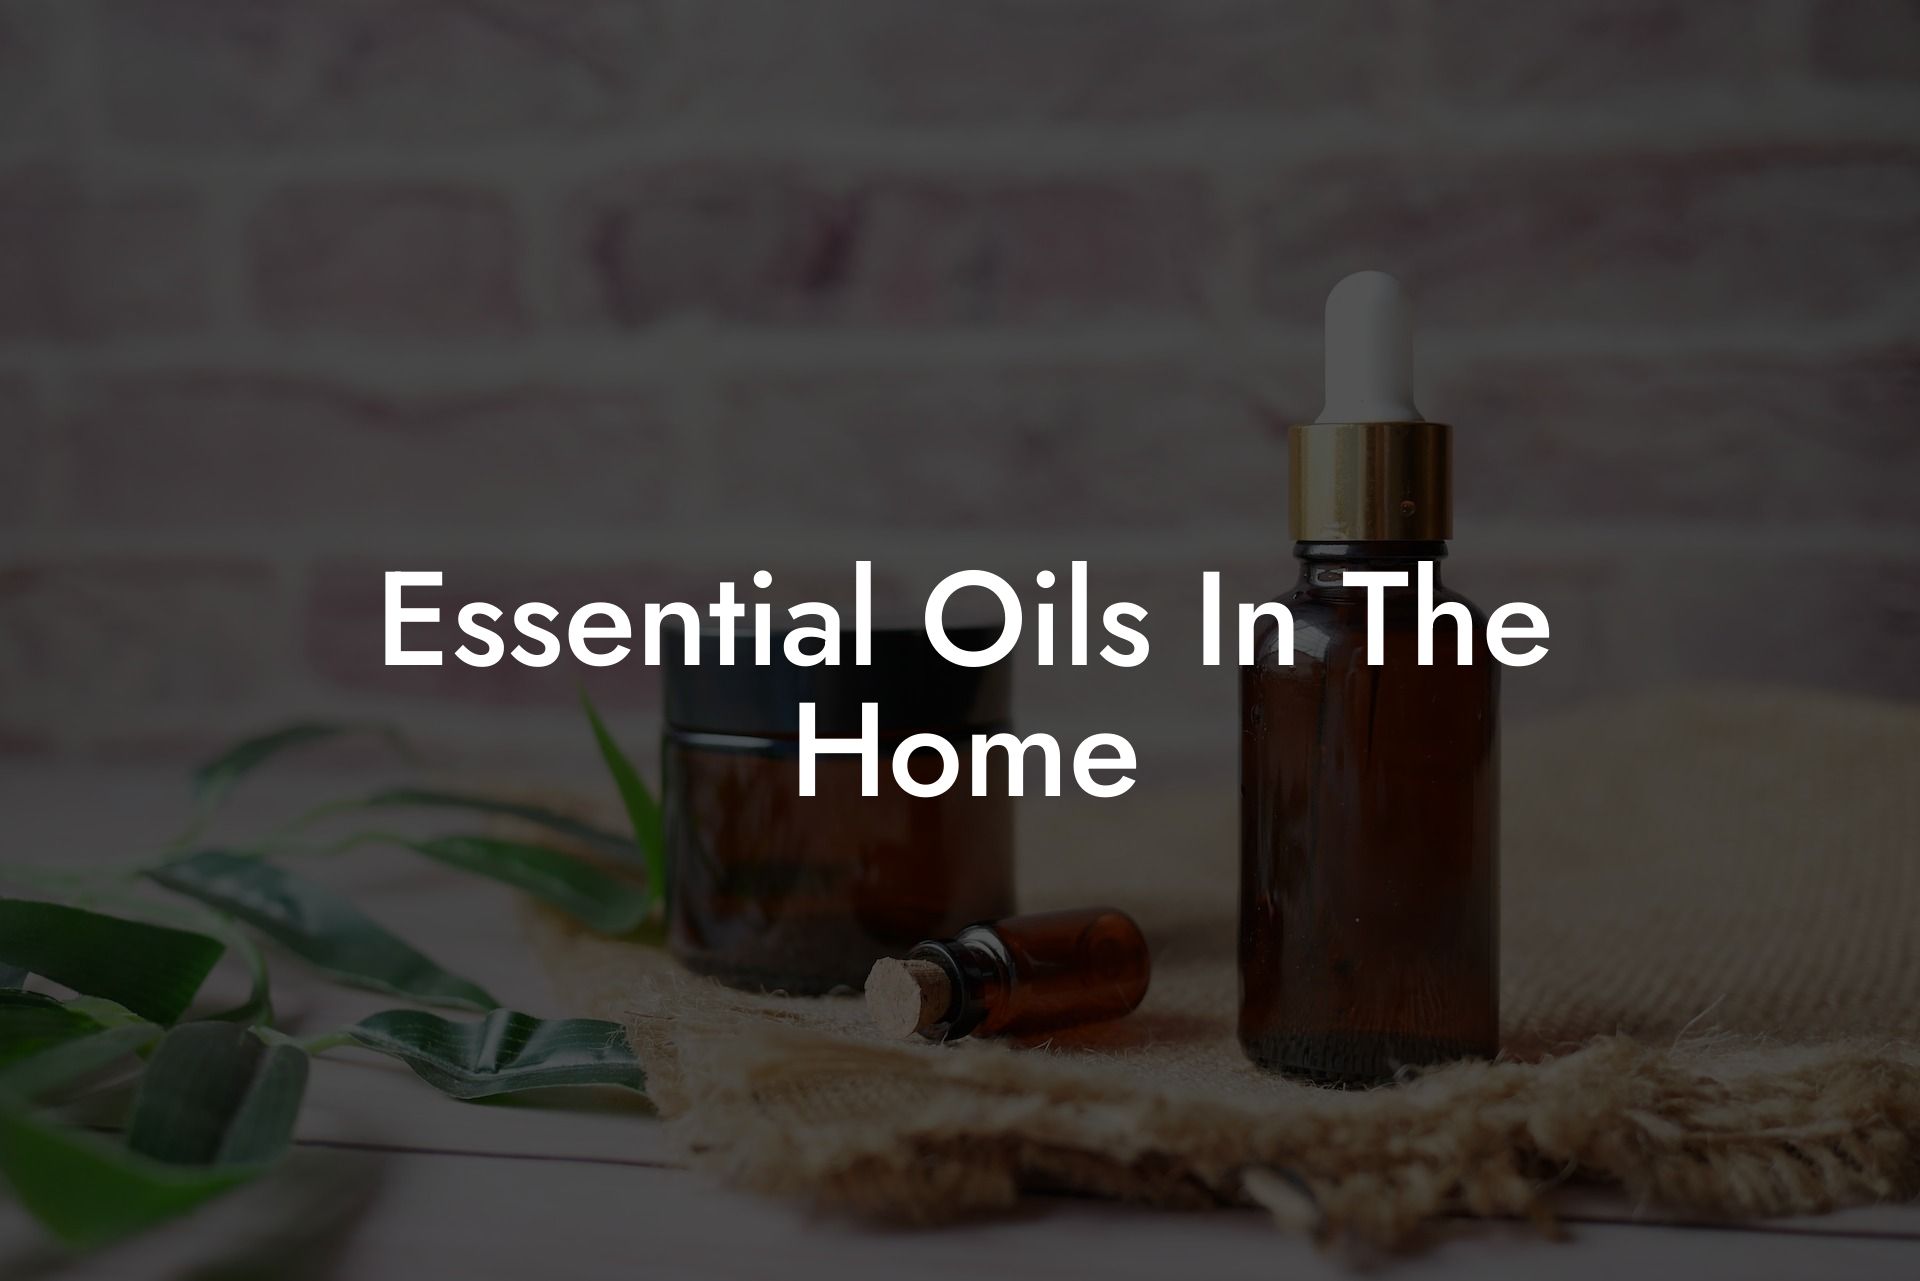 Essential Oils In The Home